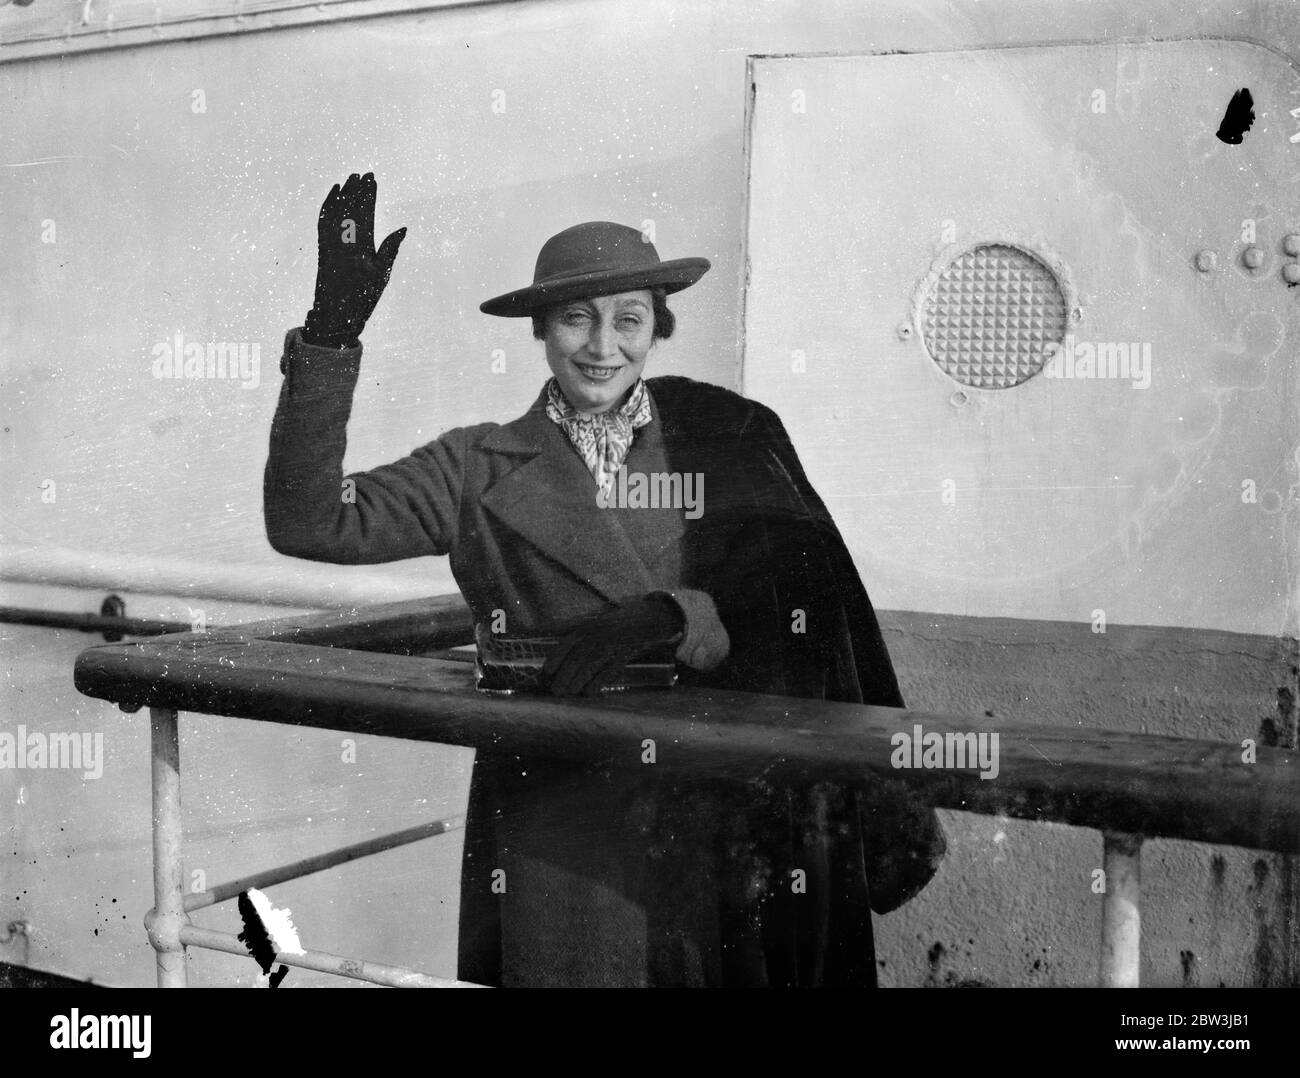 Aline McMahon arrives in England . Aline McMahon , the film actress famous for her ' motherly ' roles , arrived at Southampton aboard the SS Majestic from America . In private life she is Mrs Aline Stein . Photo shows , Aline McMahon waving on arrival at Southampton . 13 December 1935 Stock Photo